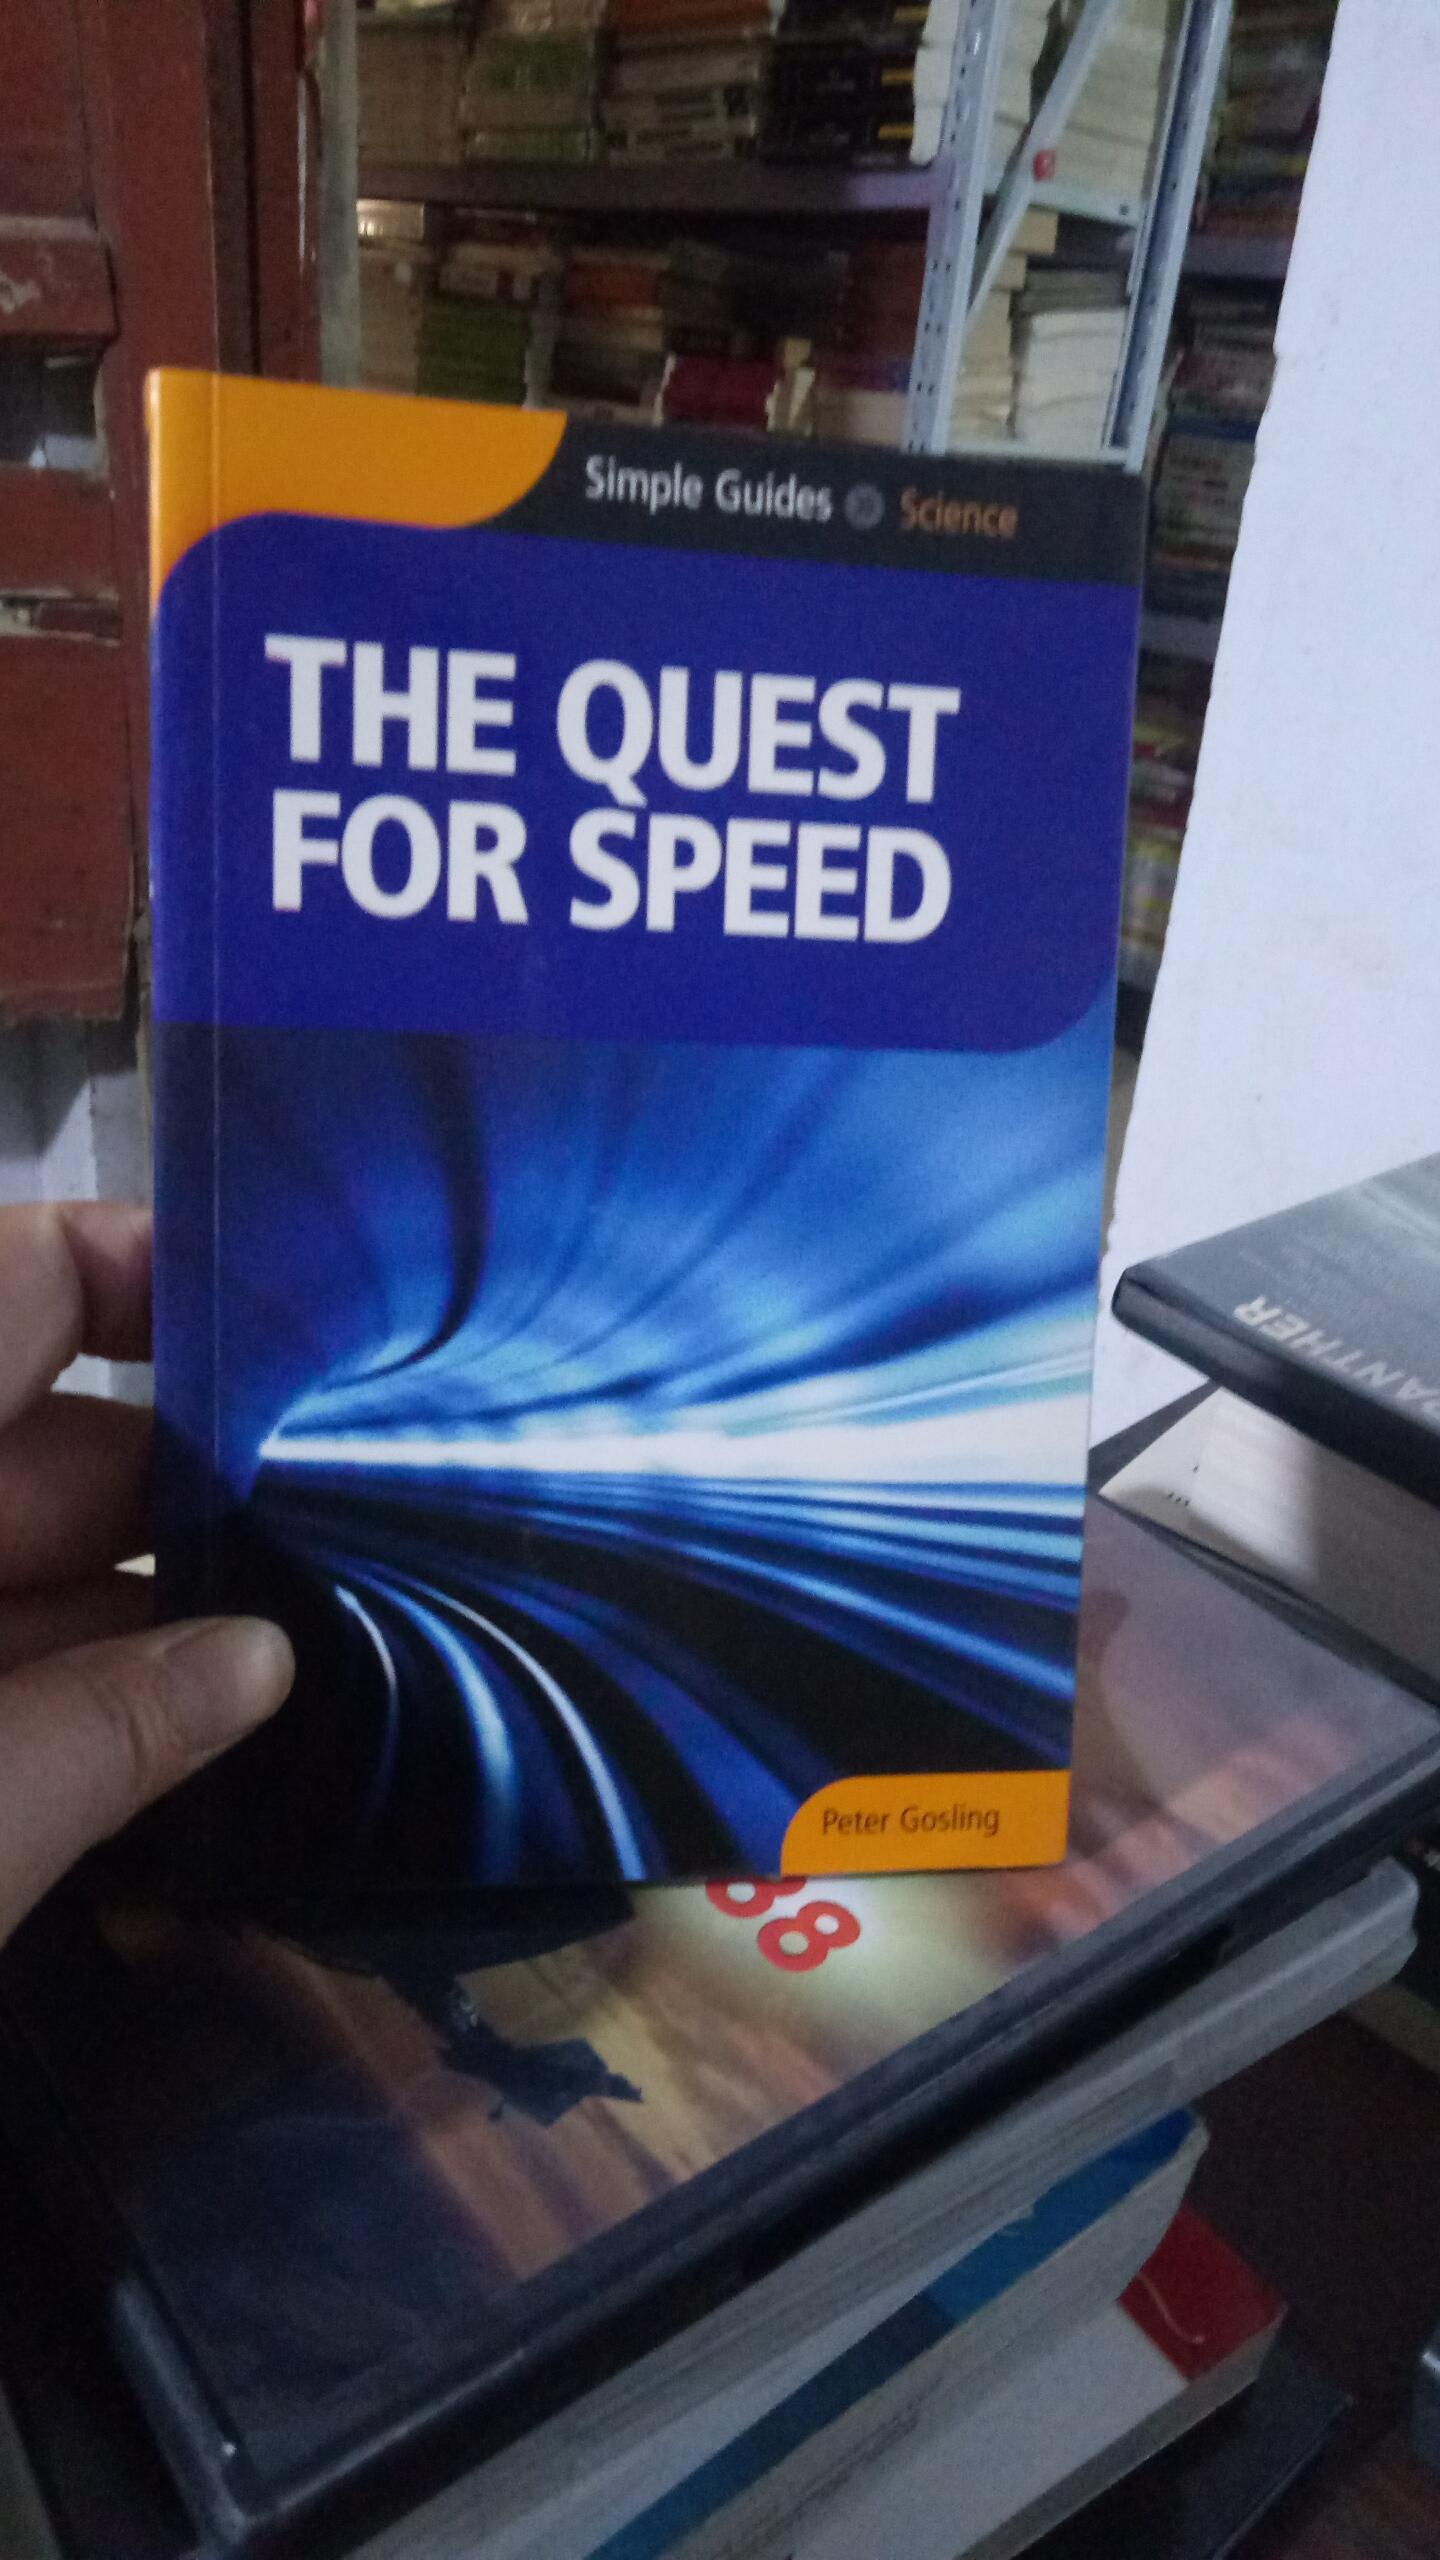 The Quest for Speed